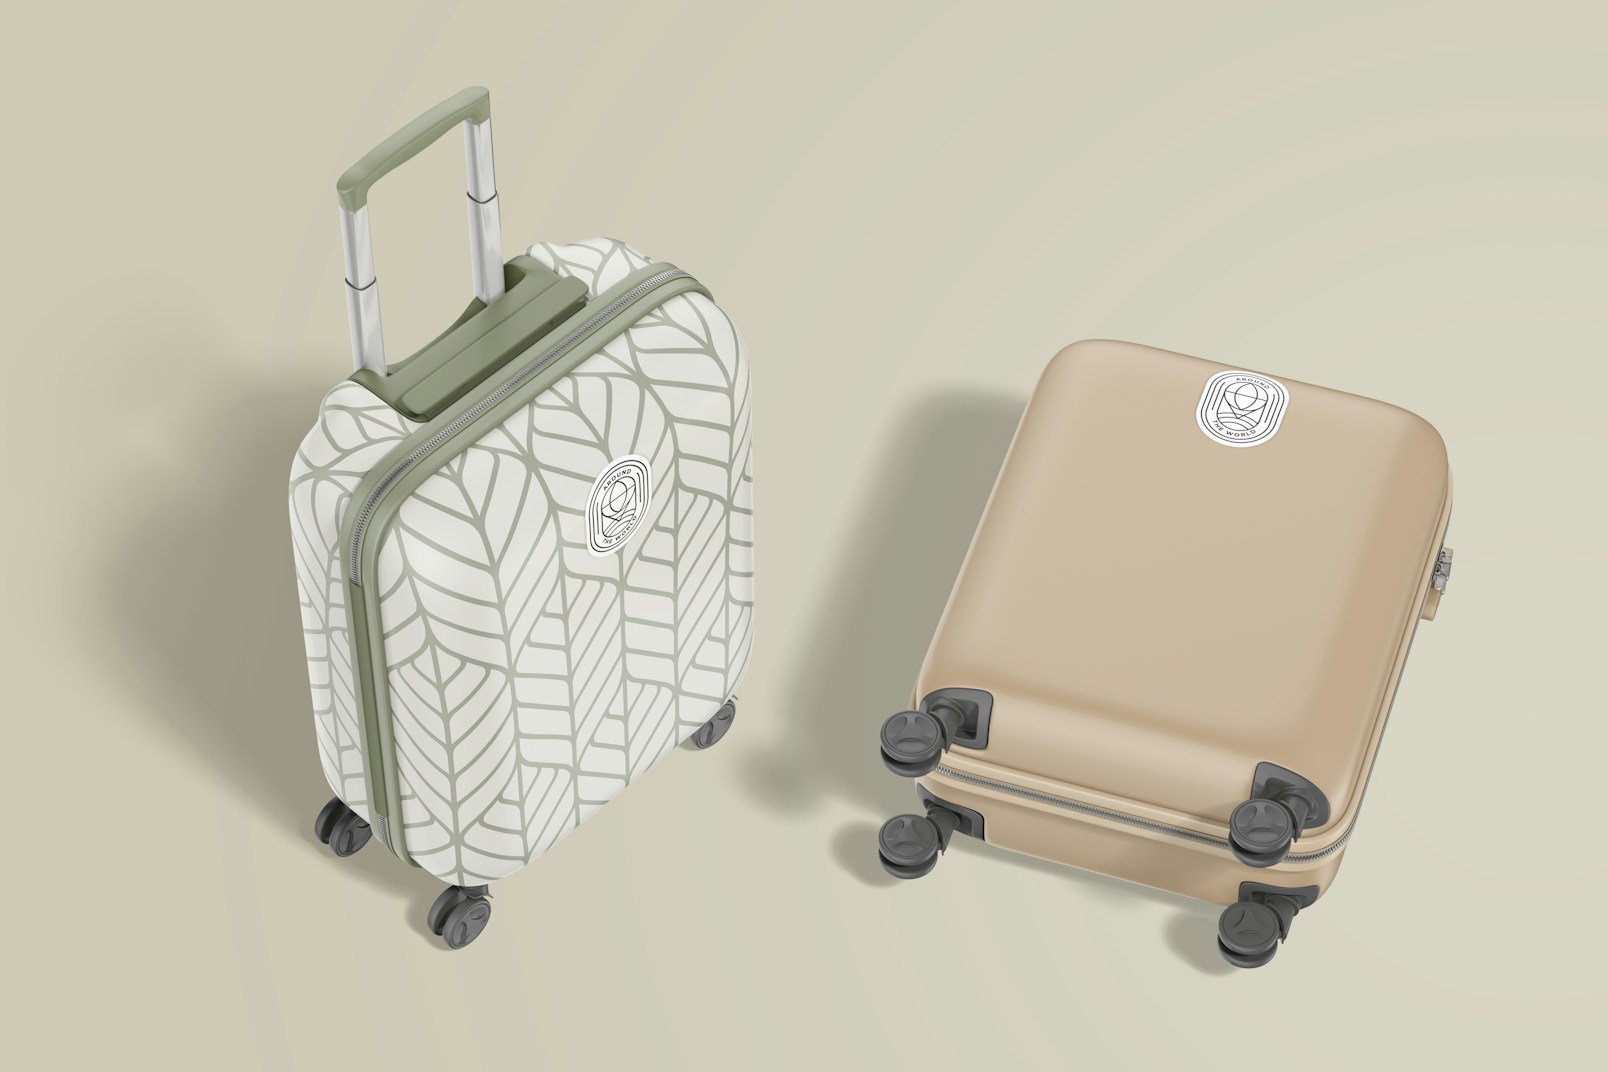 Medium Suitcases Mockup, Standing and Dropped